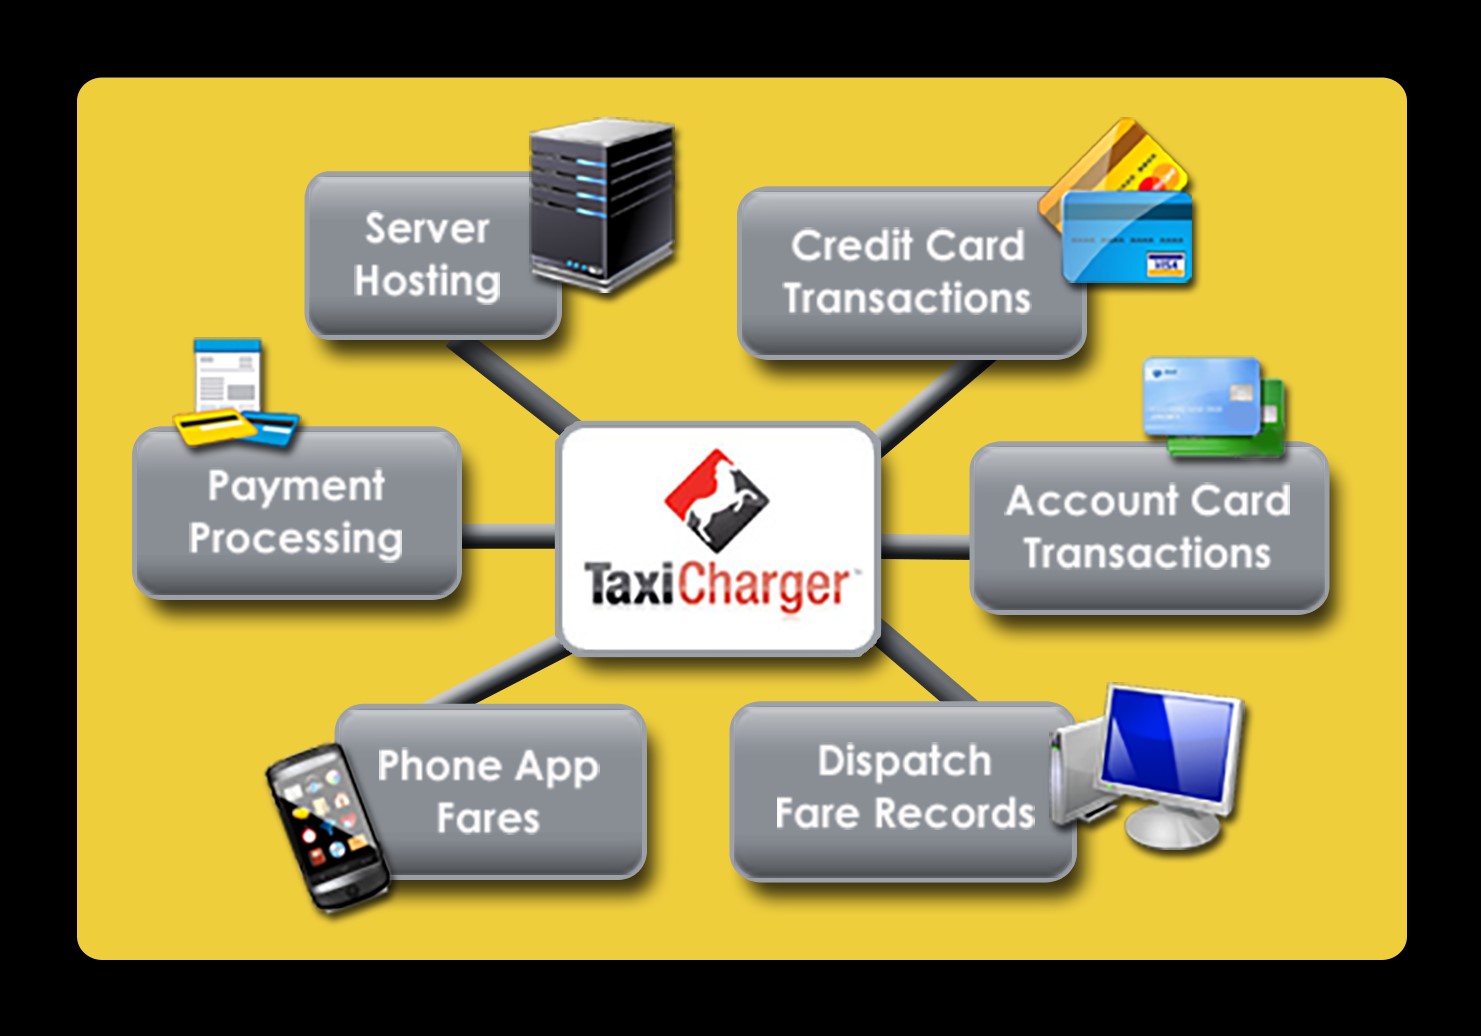 Support Services: Server Hosting, Credit Card Transactions, Account Card Transactions, Dispatch Fare Records, Phone App Fares, Payment Processing